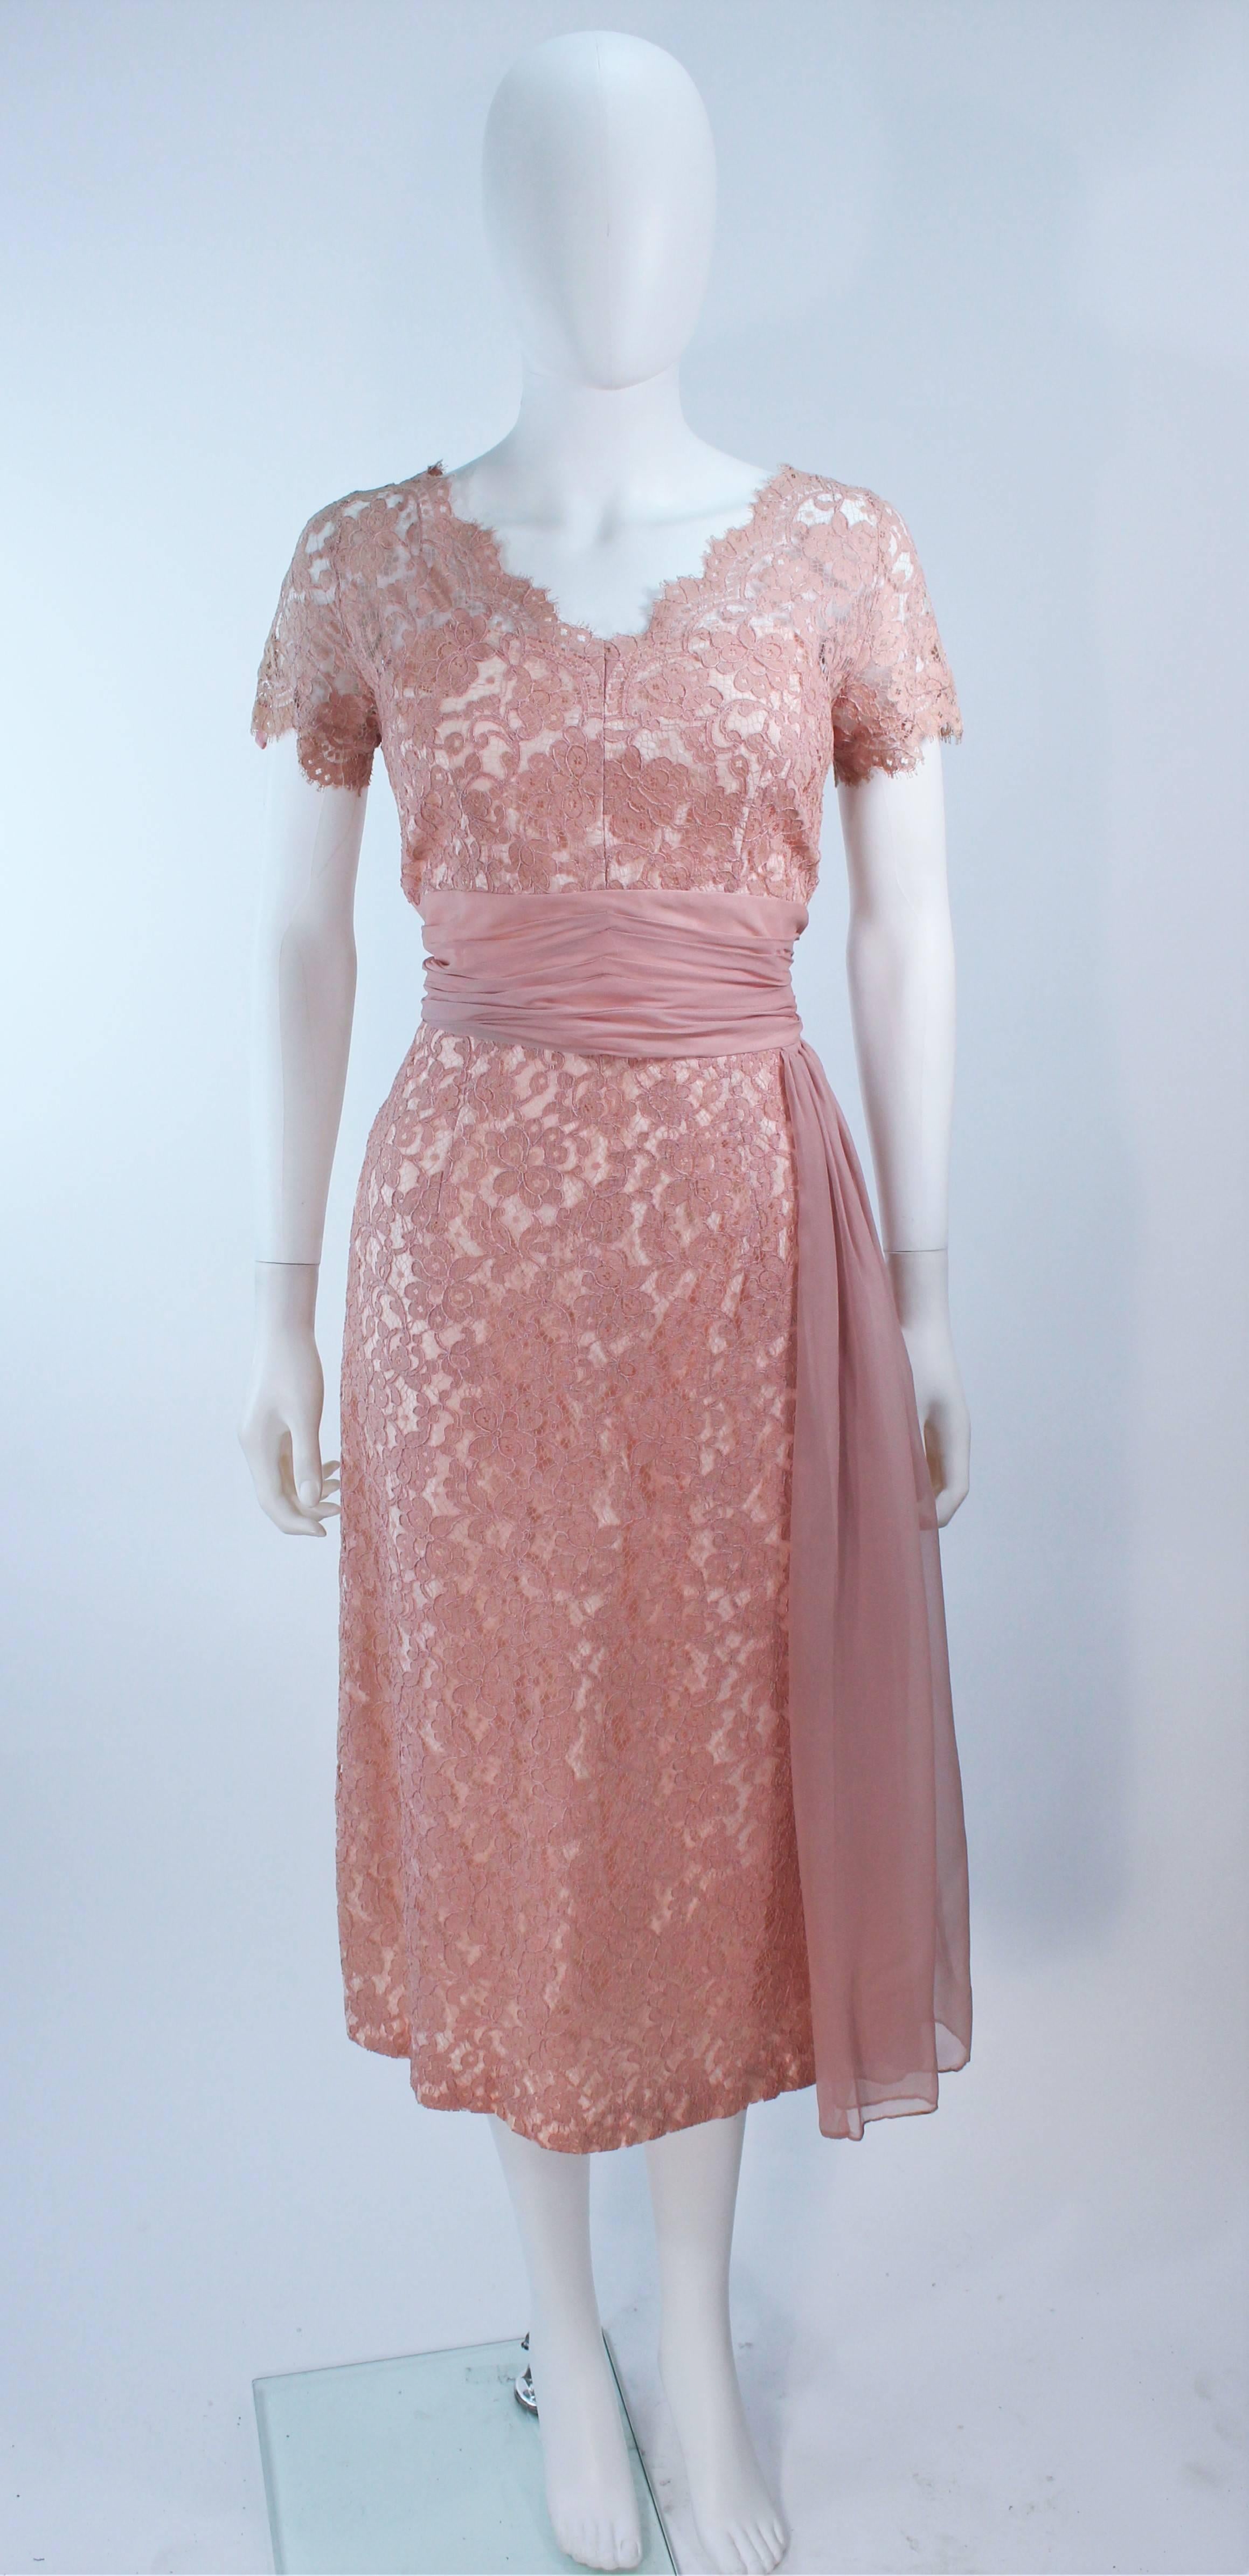  This cocktail dress is composed of a peach hue lace with scalloped edges. Features a gathered chiffon waist and drape. Satin lining. There is a center back zipper closure. In great vintage condition.

  **Please cross-reference measurements for